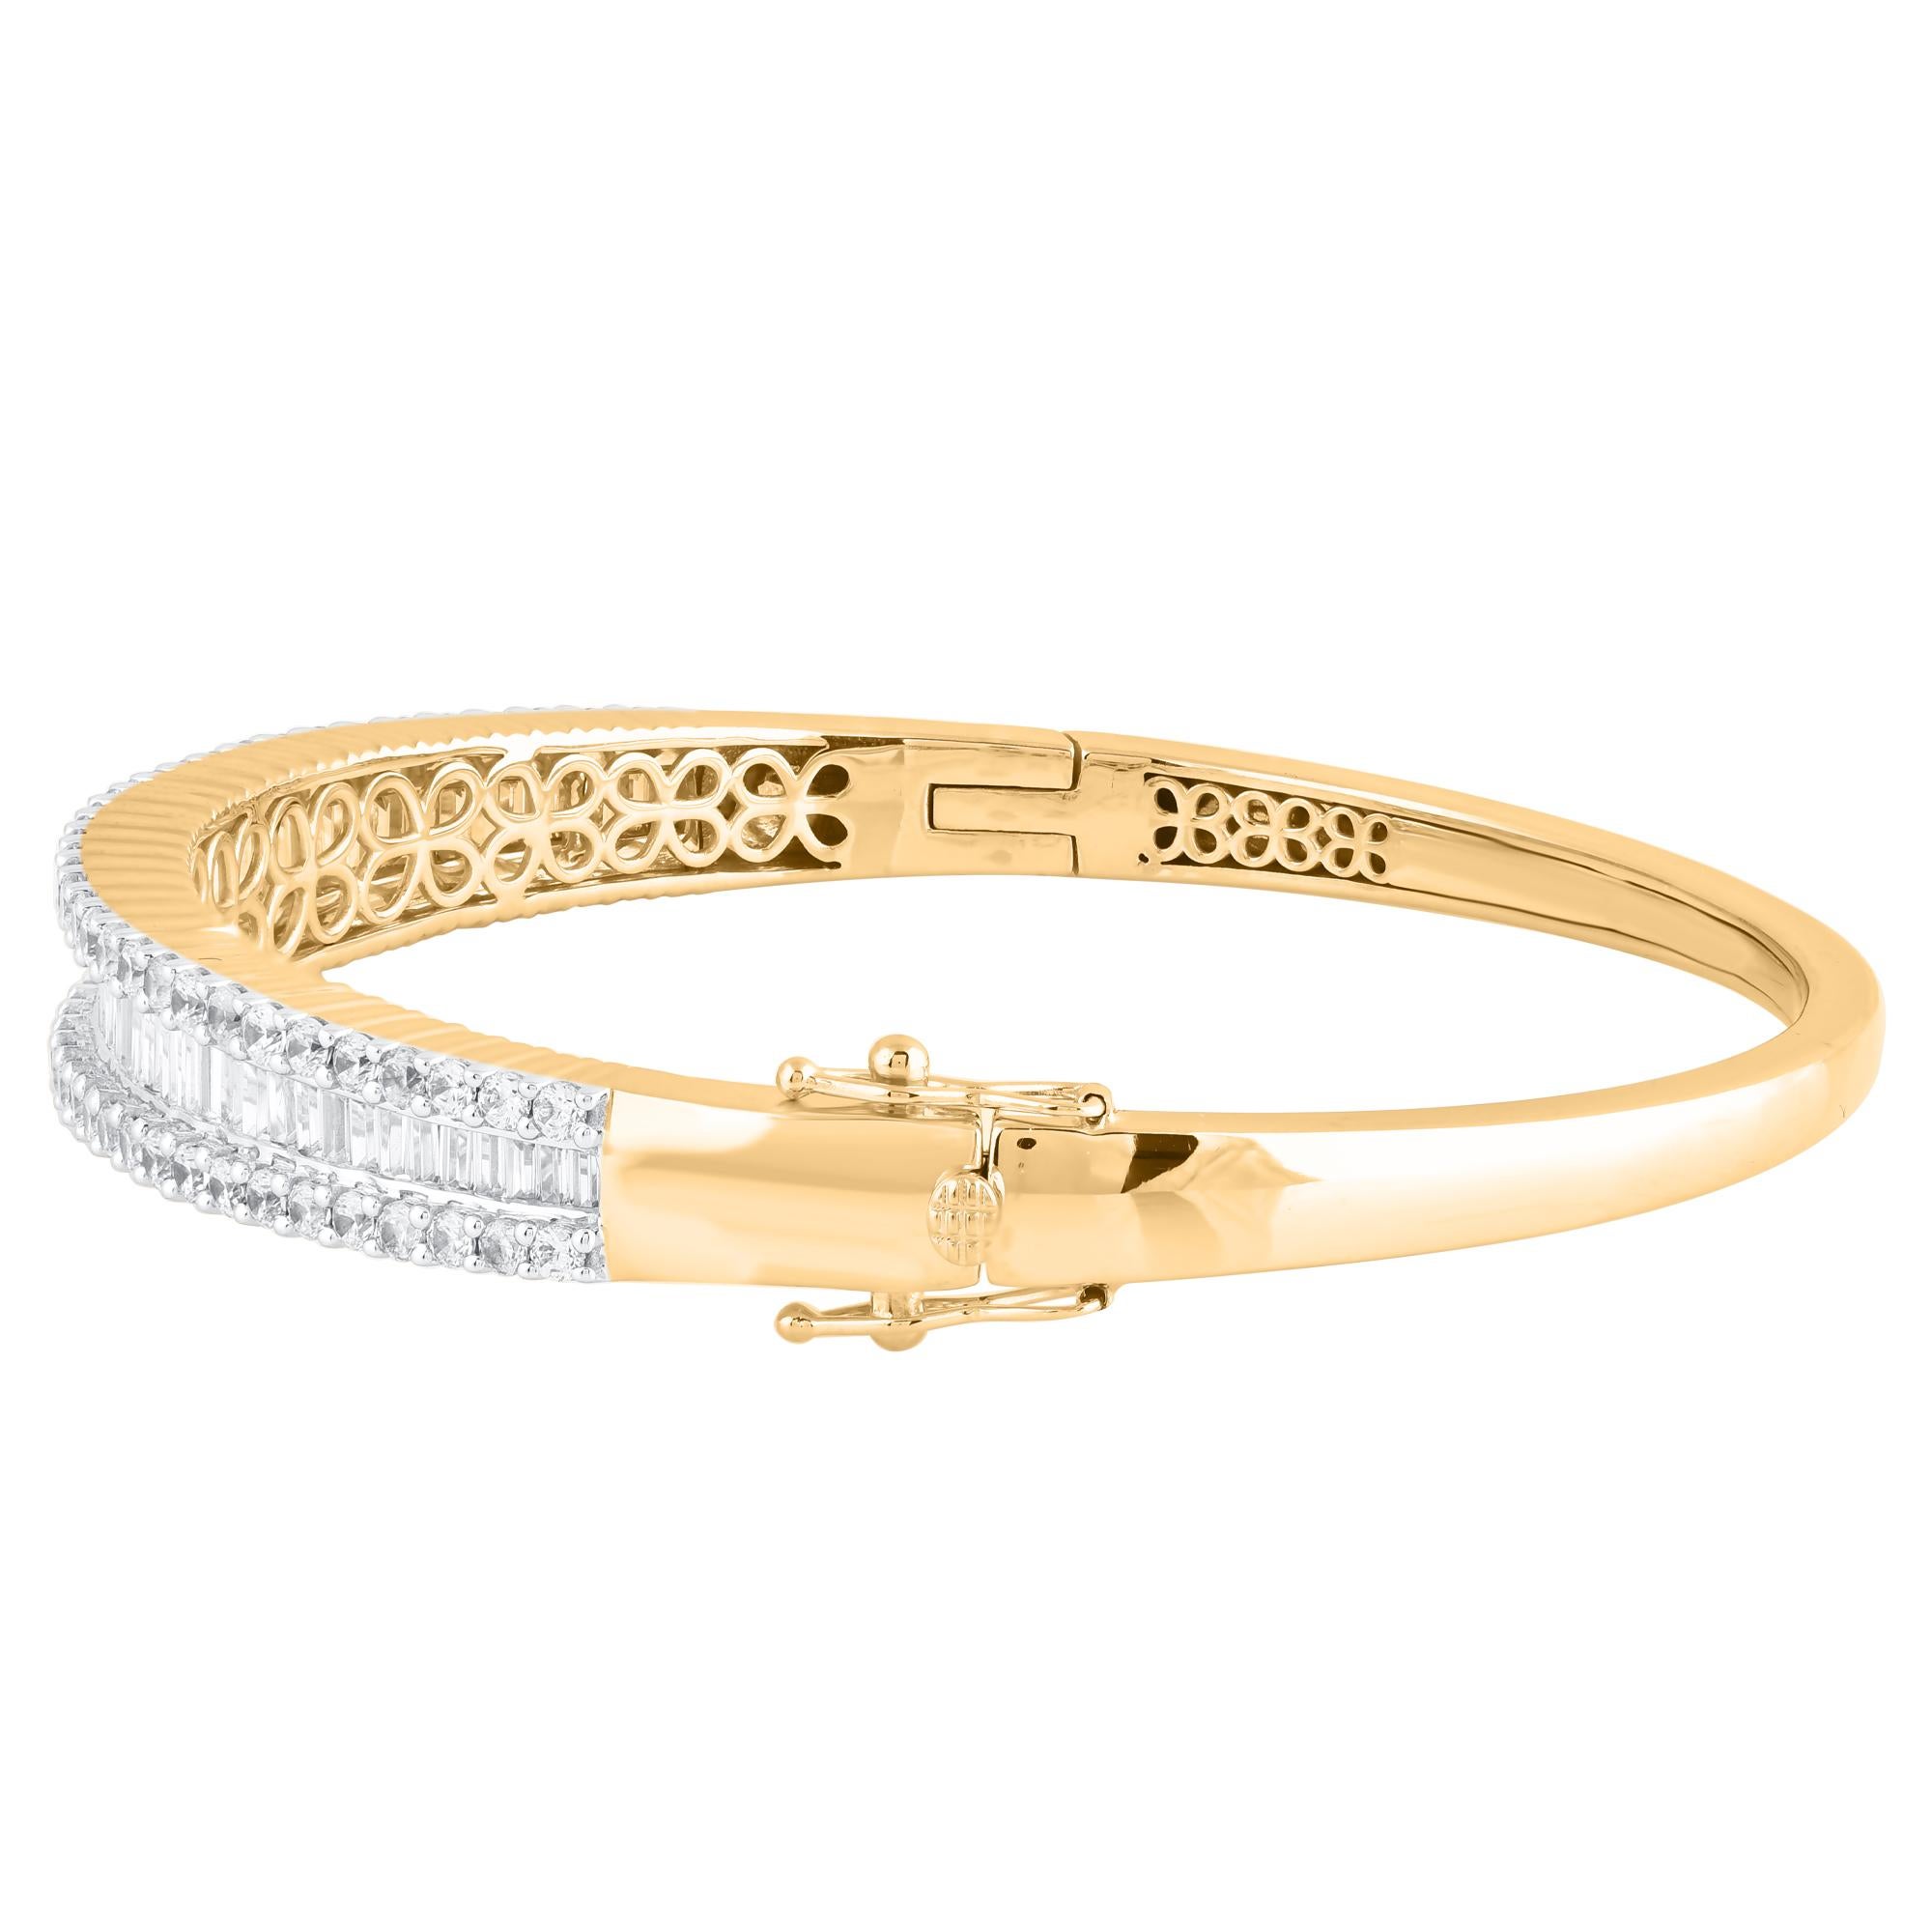 Classic and sophisticated, this diamond bangle bracelet pairs well with any attire. This Shimmering bangle bracelet features 119 natural brilliant cut & baguette diamonds in prong & channel setting and crafted in 18kt yellow gold. Diamonds are